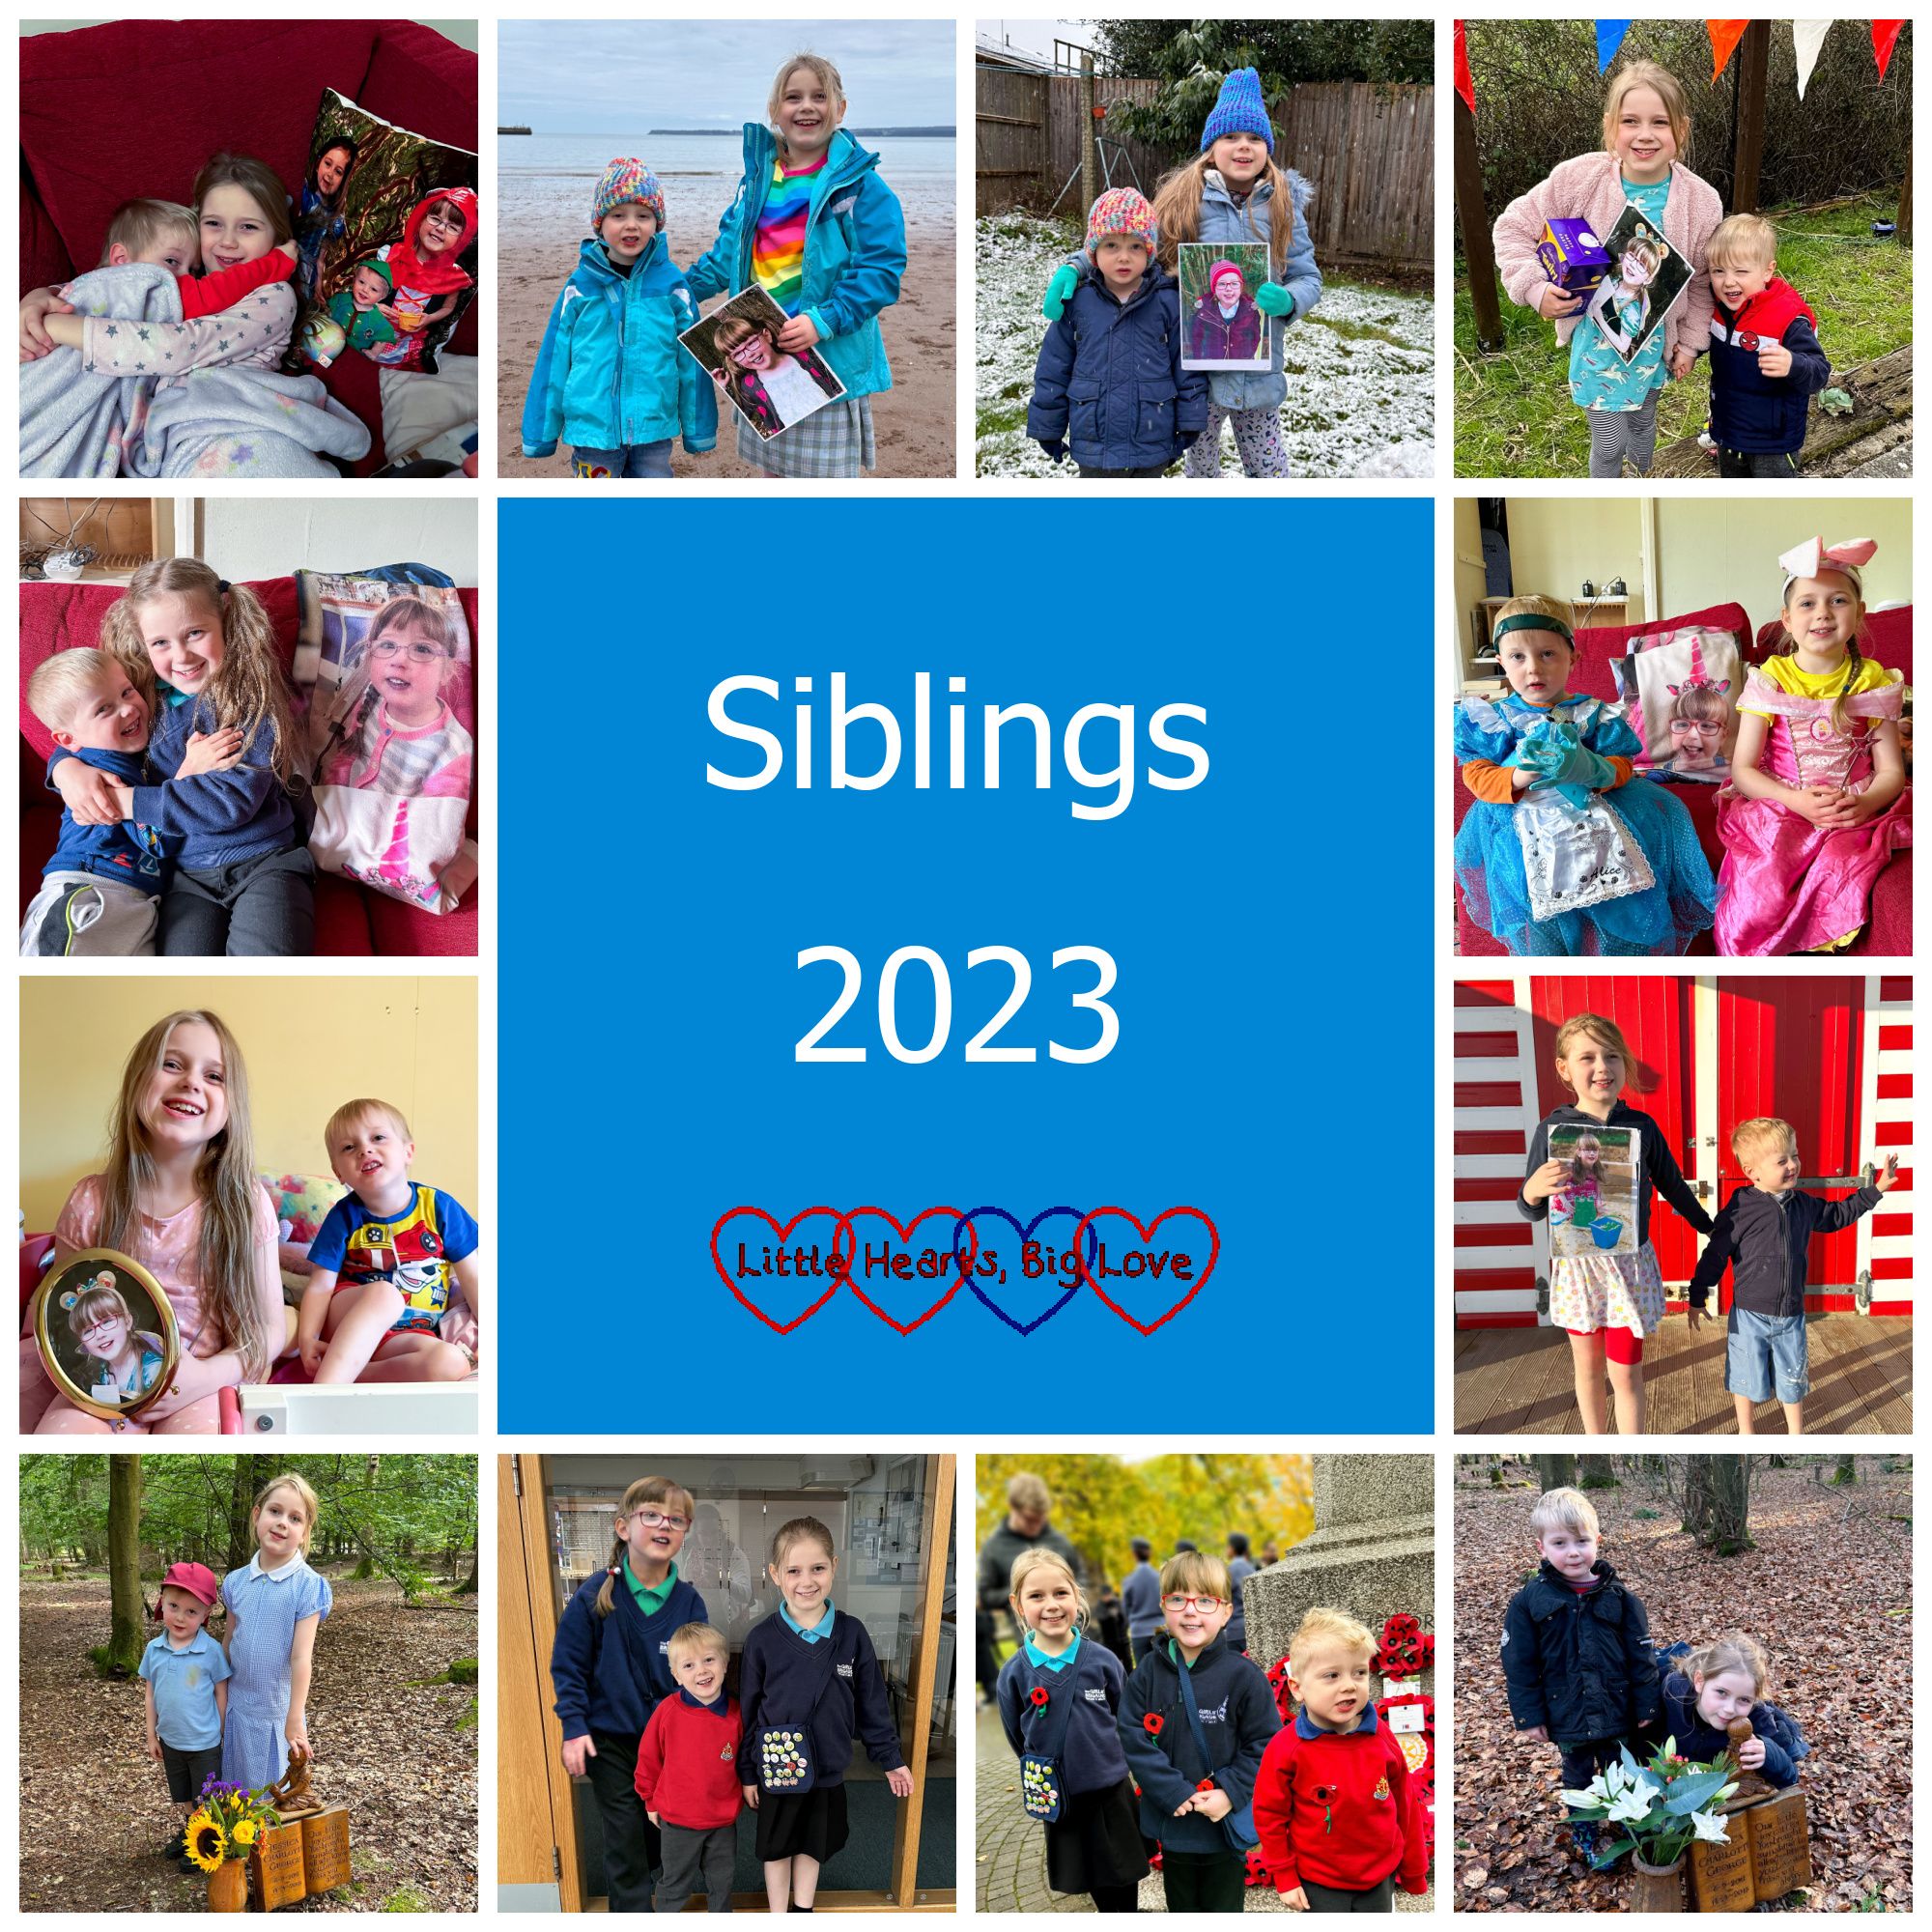 A selection of photos of Sophie, Thomas and Jessica together - one for each month of 2023. "Siblings 2023"